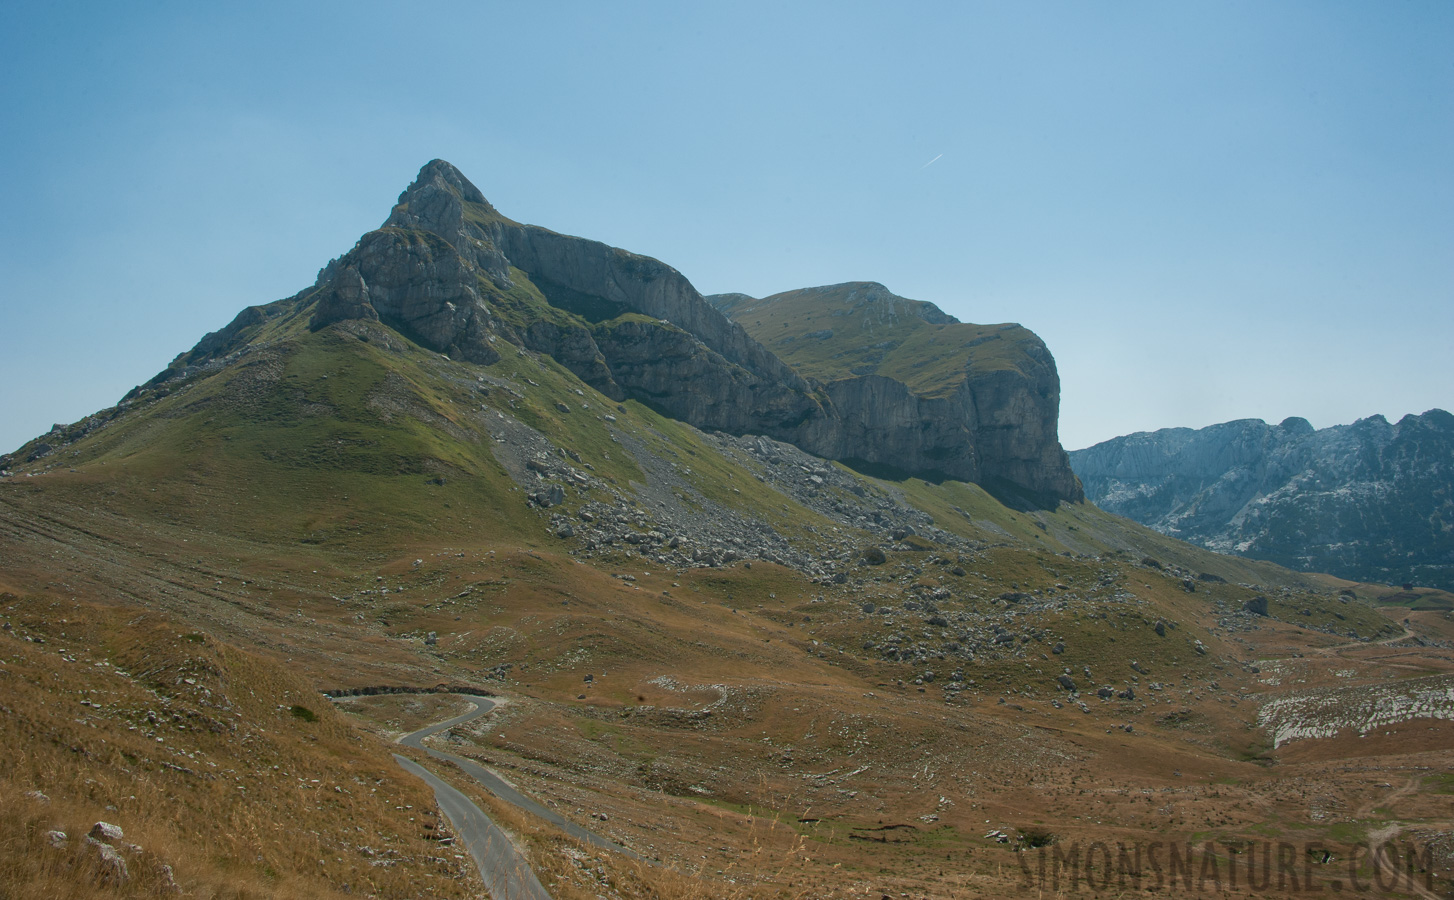 Montenegro - In the region of the Durmitor massif [28 mm, 1/160 sec at f / 18, ISO 400]